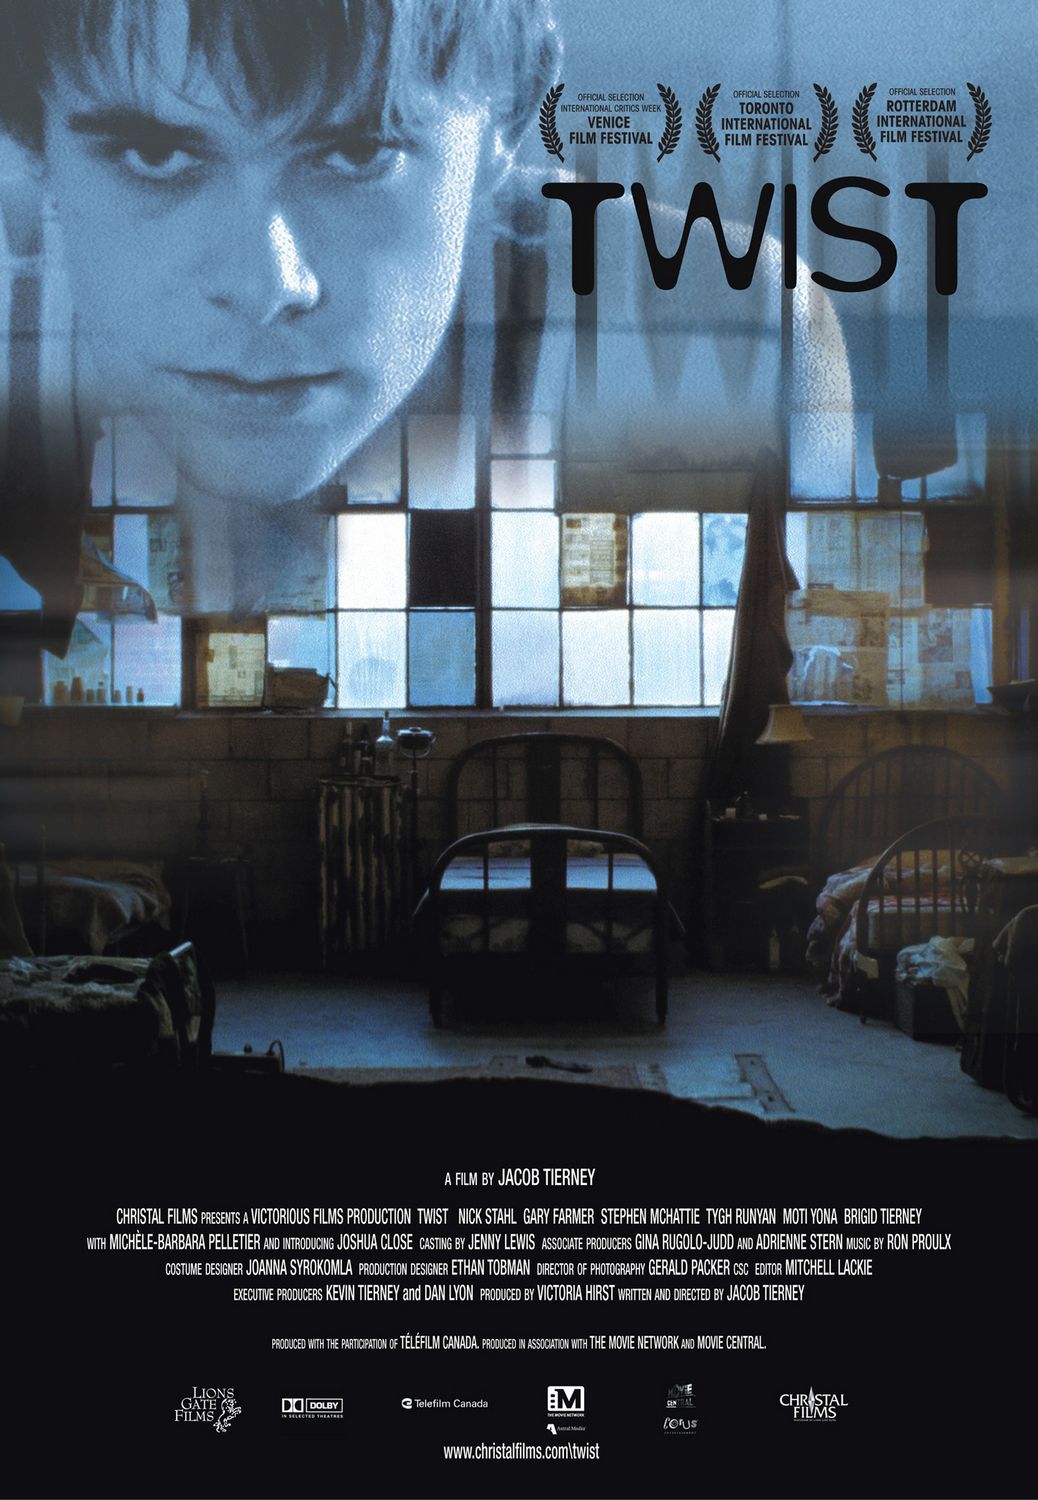 Return to Main Page for Twist Posters